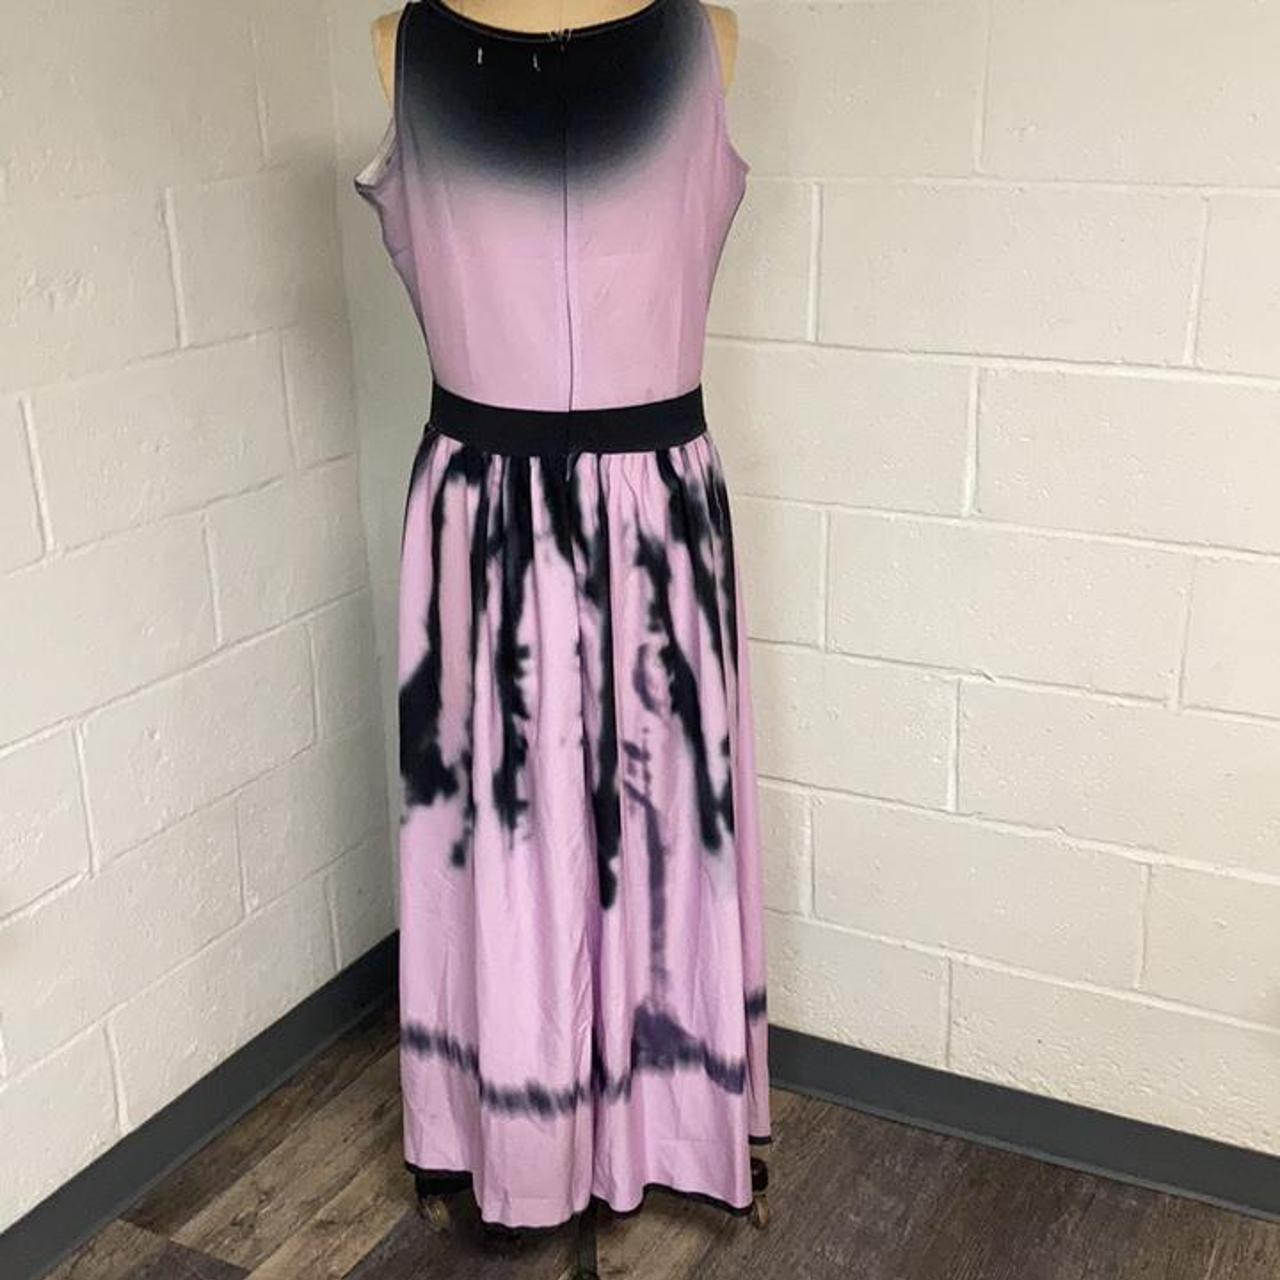 Women's Black and Pink Dress (4)